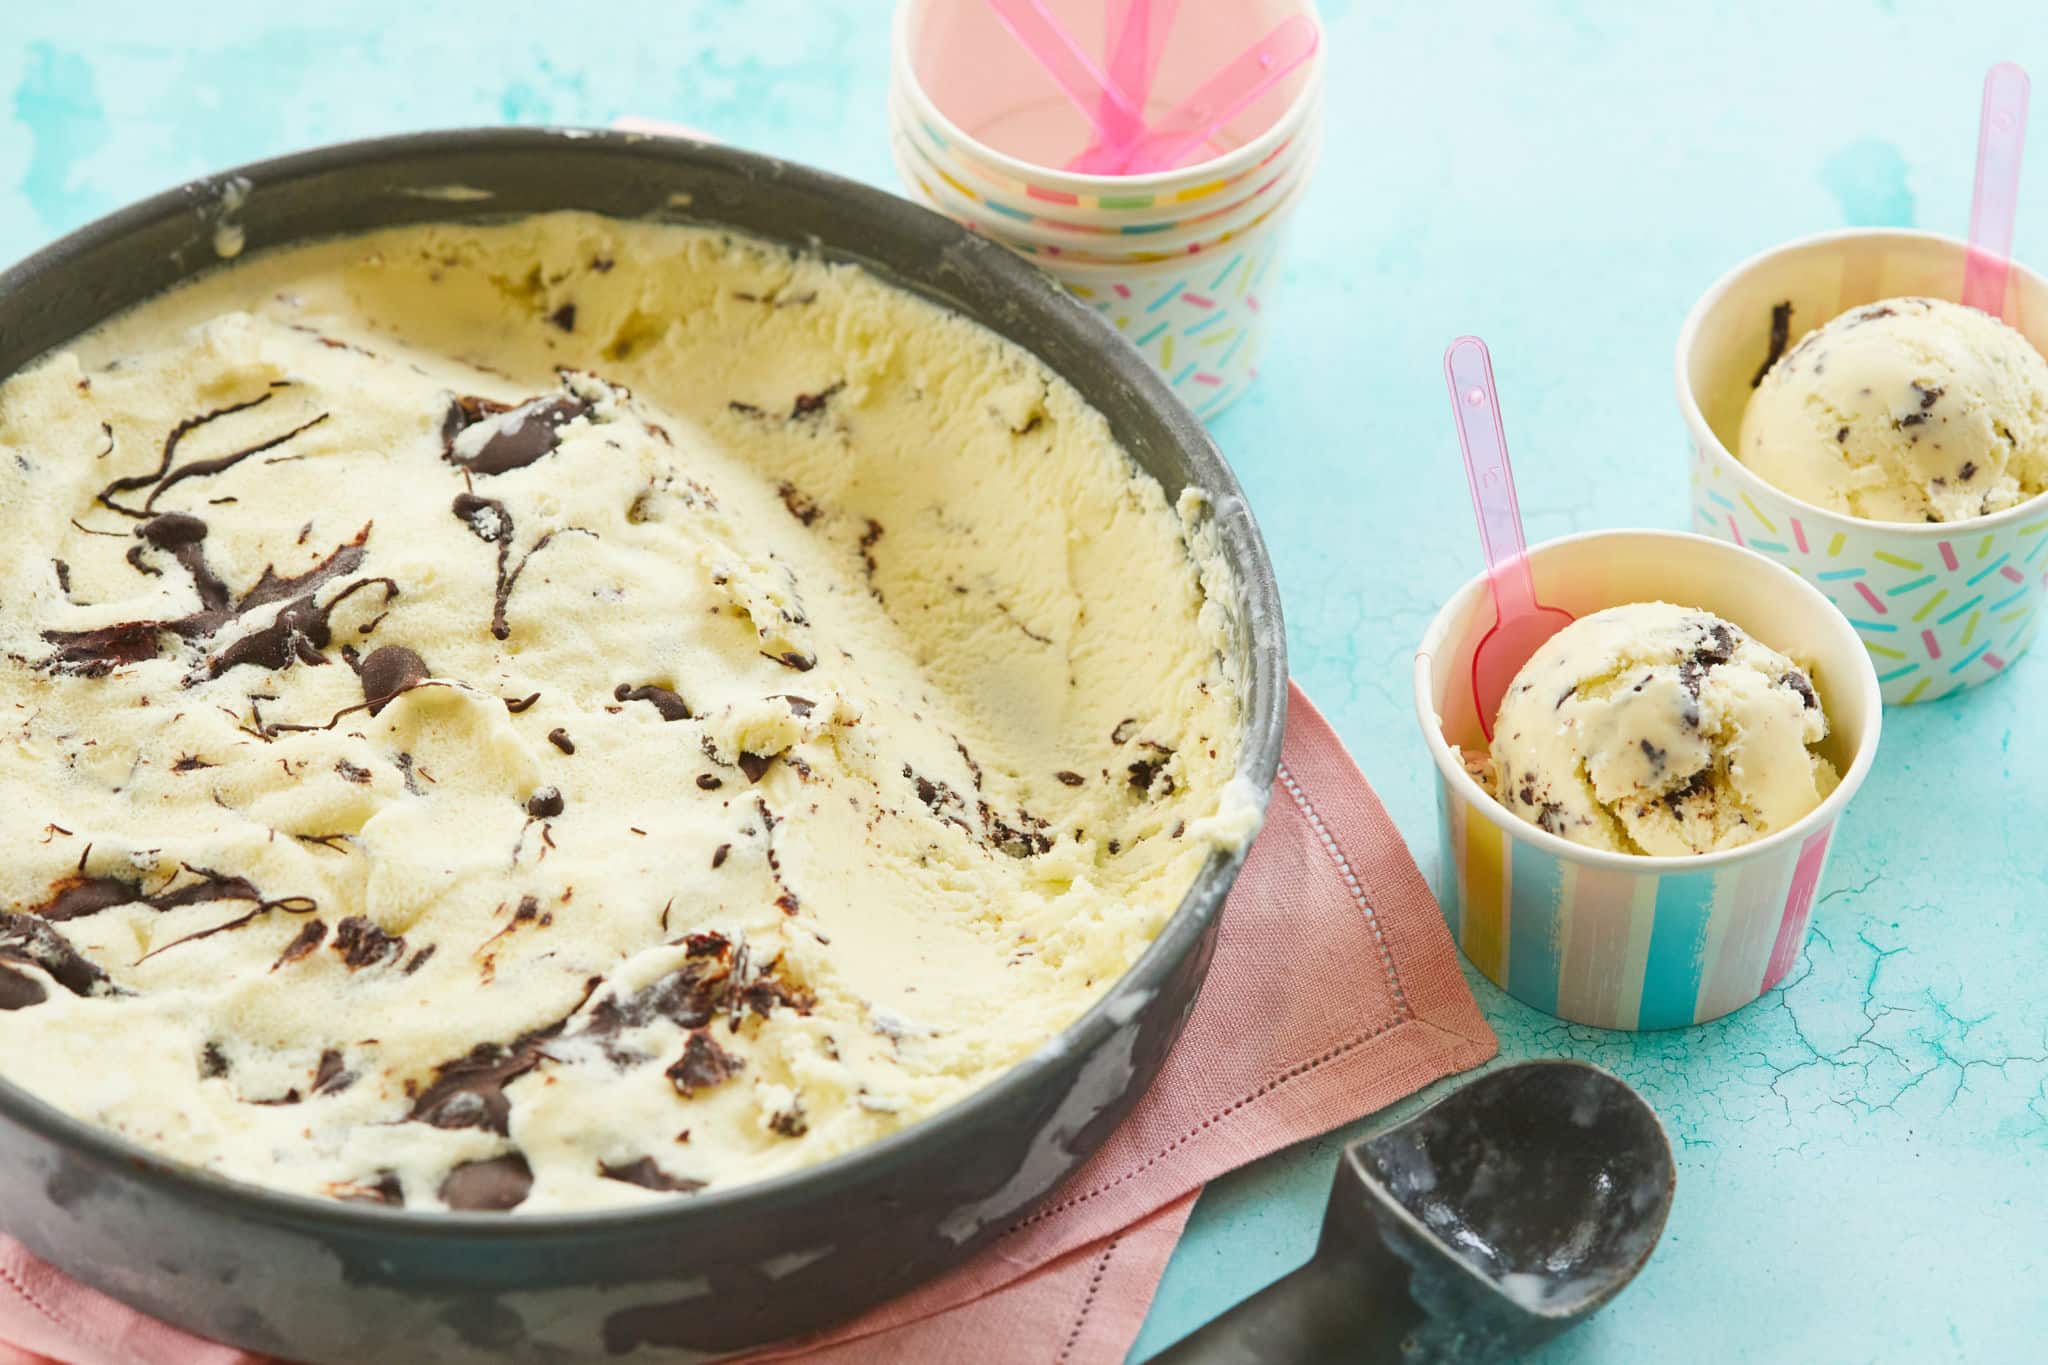 Mint Chocolate Chip Gelato scooped into two servings.